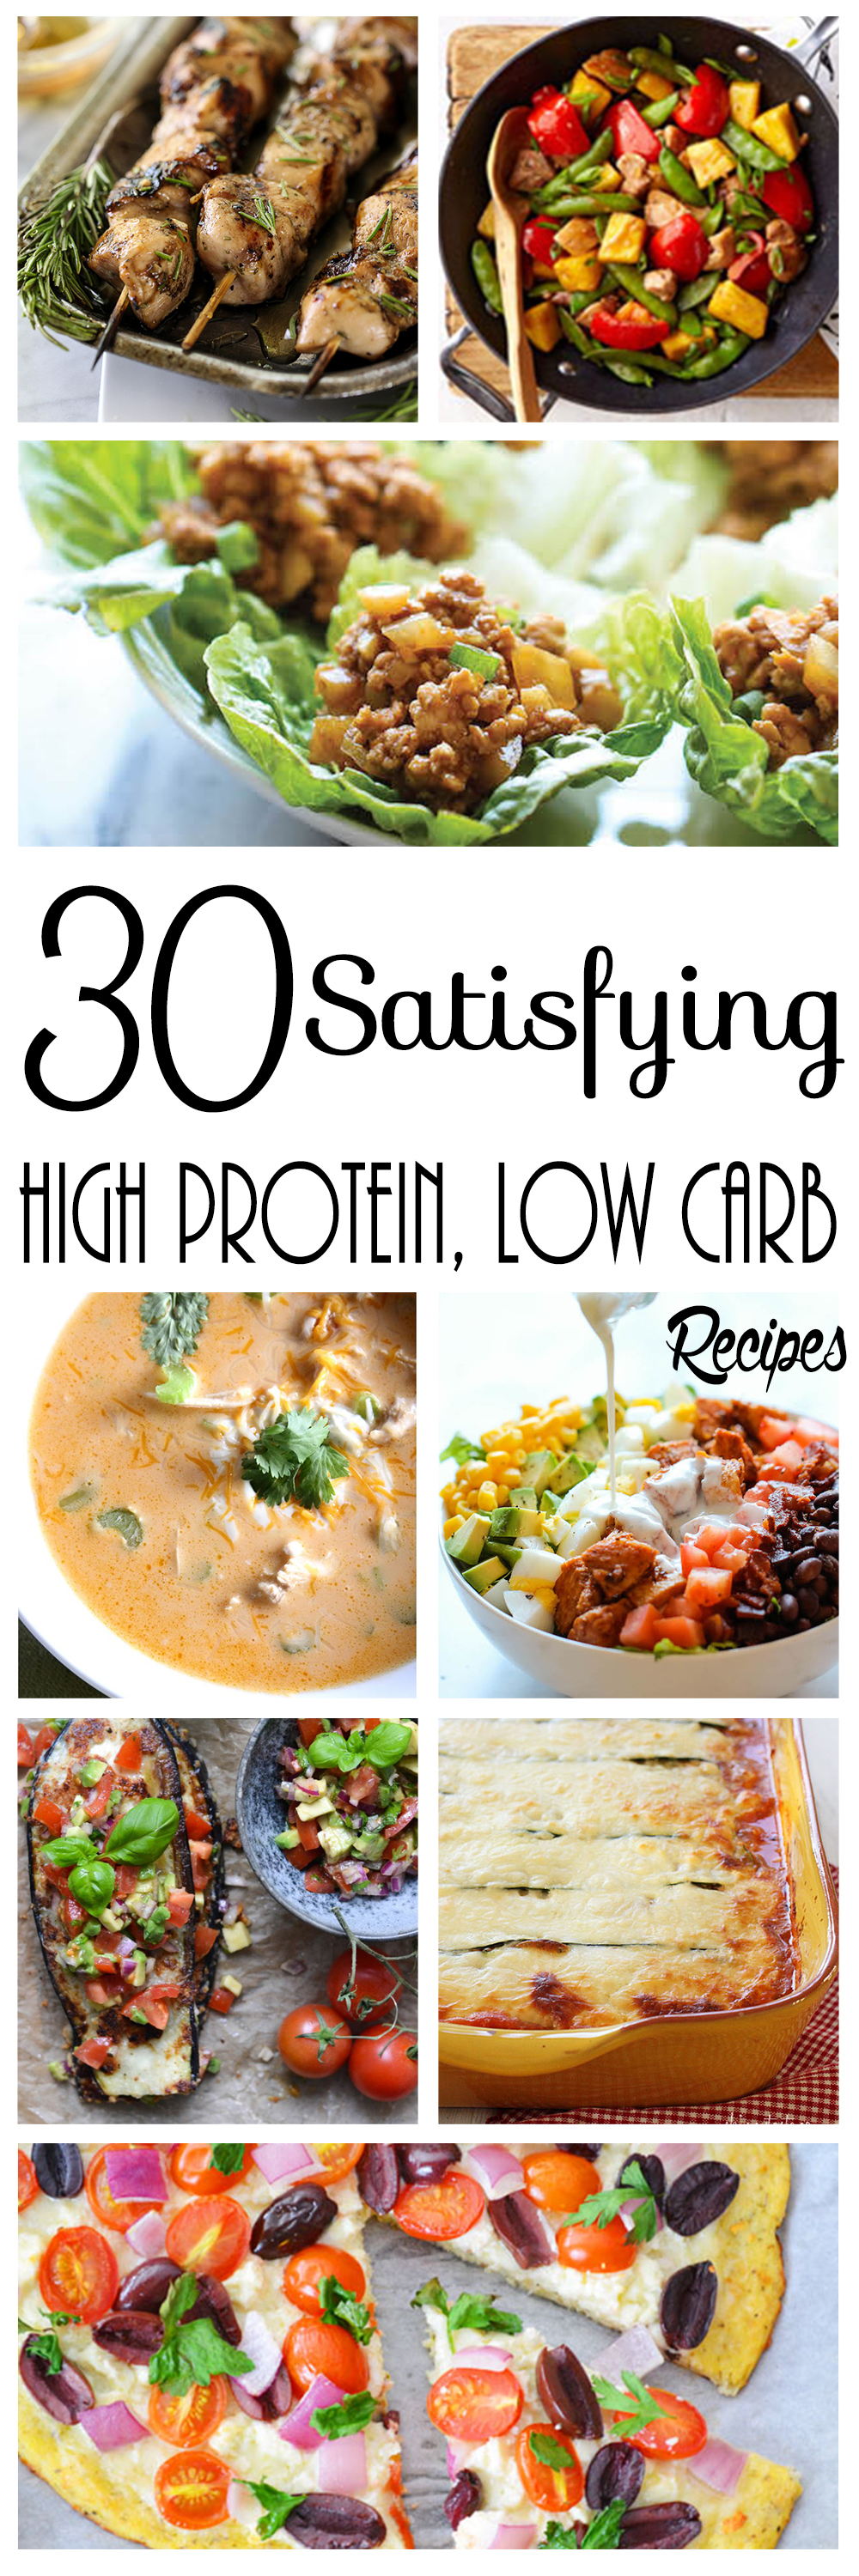 30 Satisfying High Protein, Low Carb Recipes